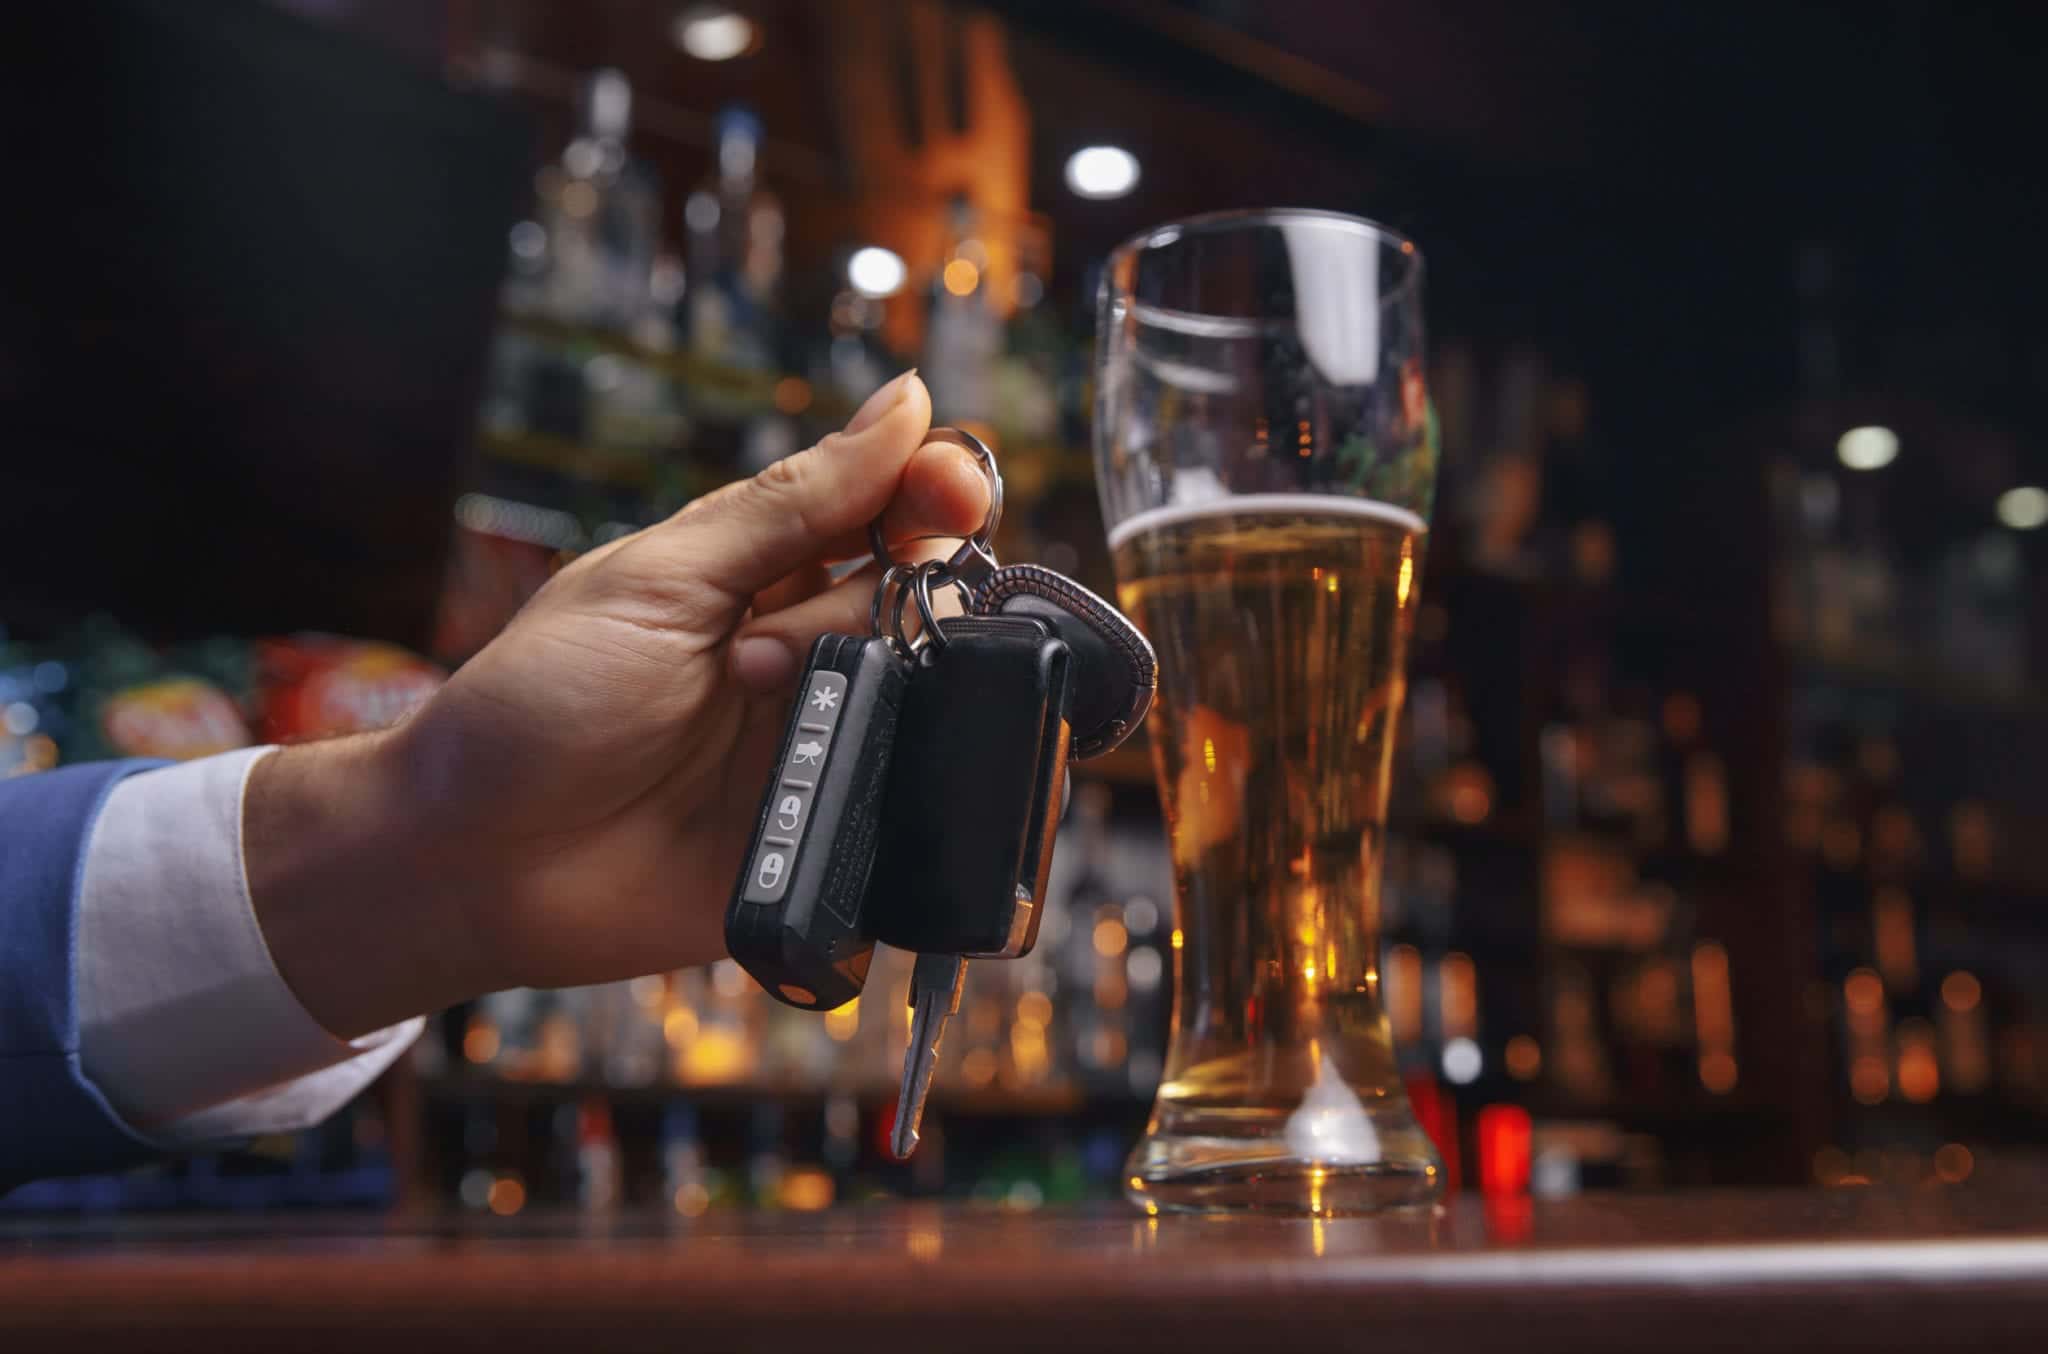 Colorado Just Barely Eeks Out of the Drunk Driving Top Dozen